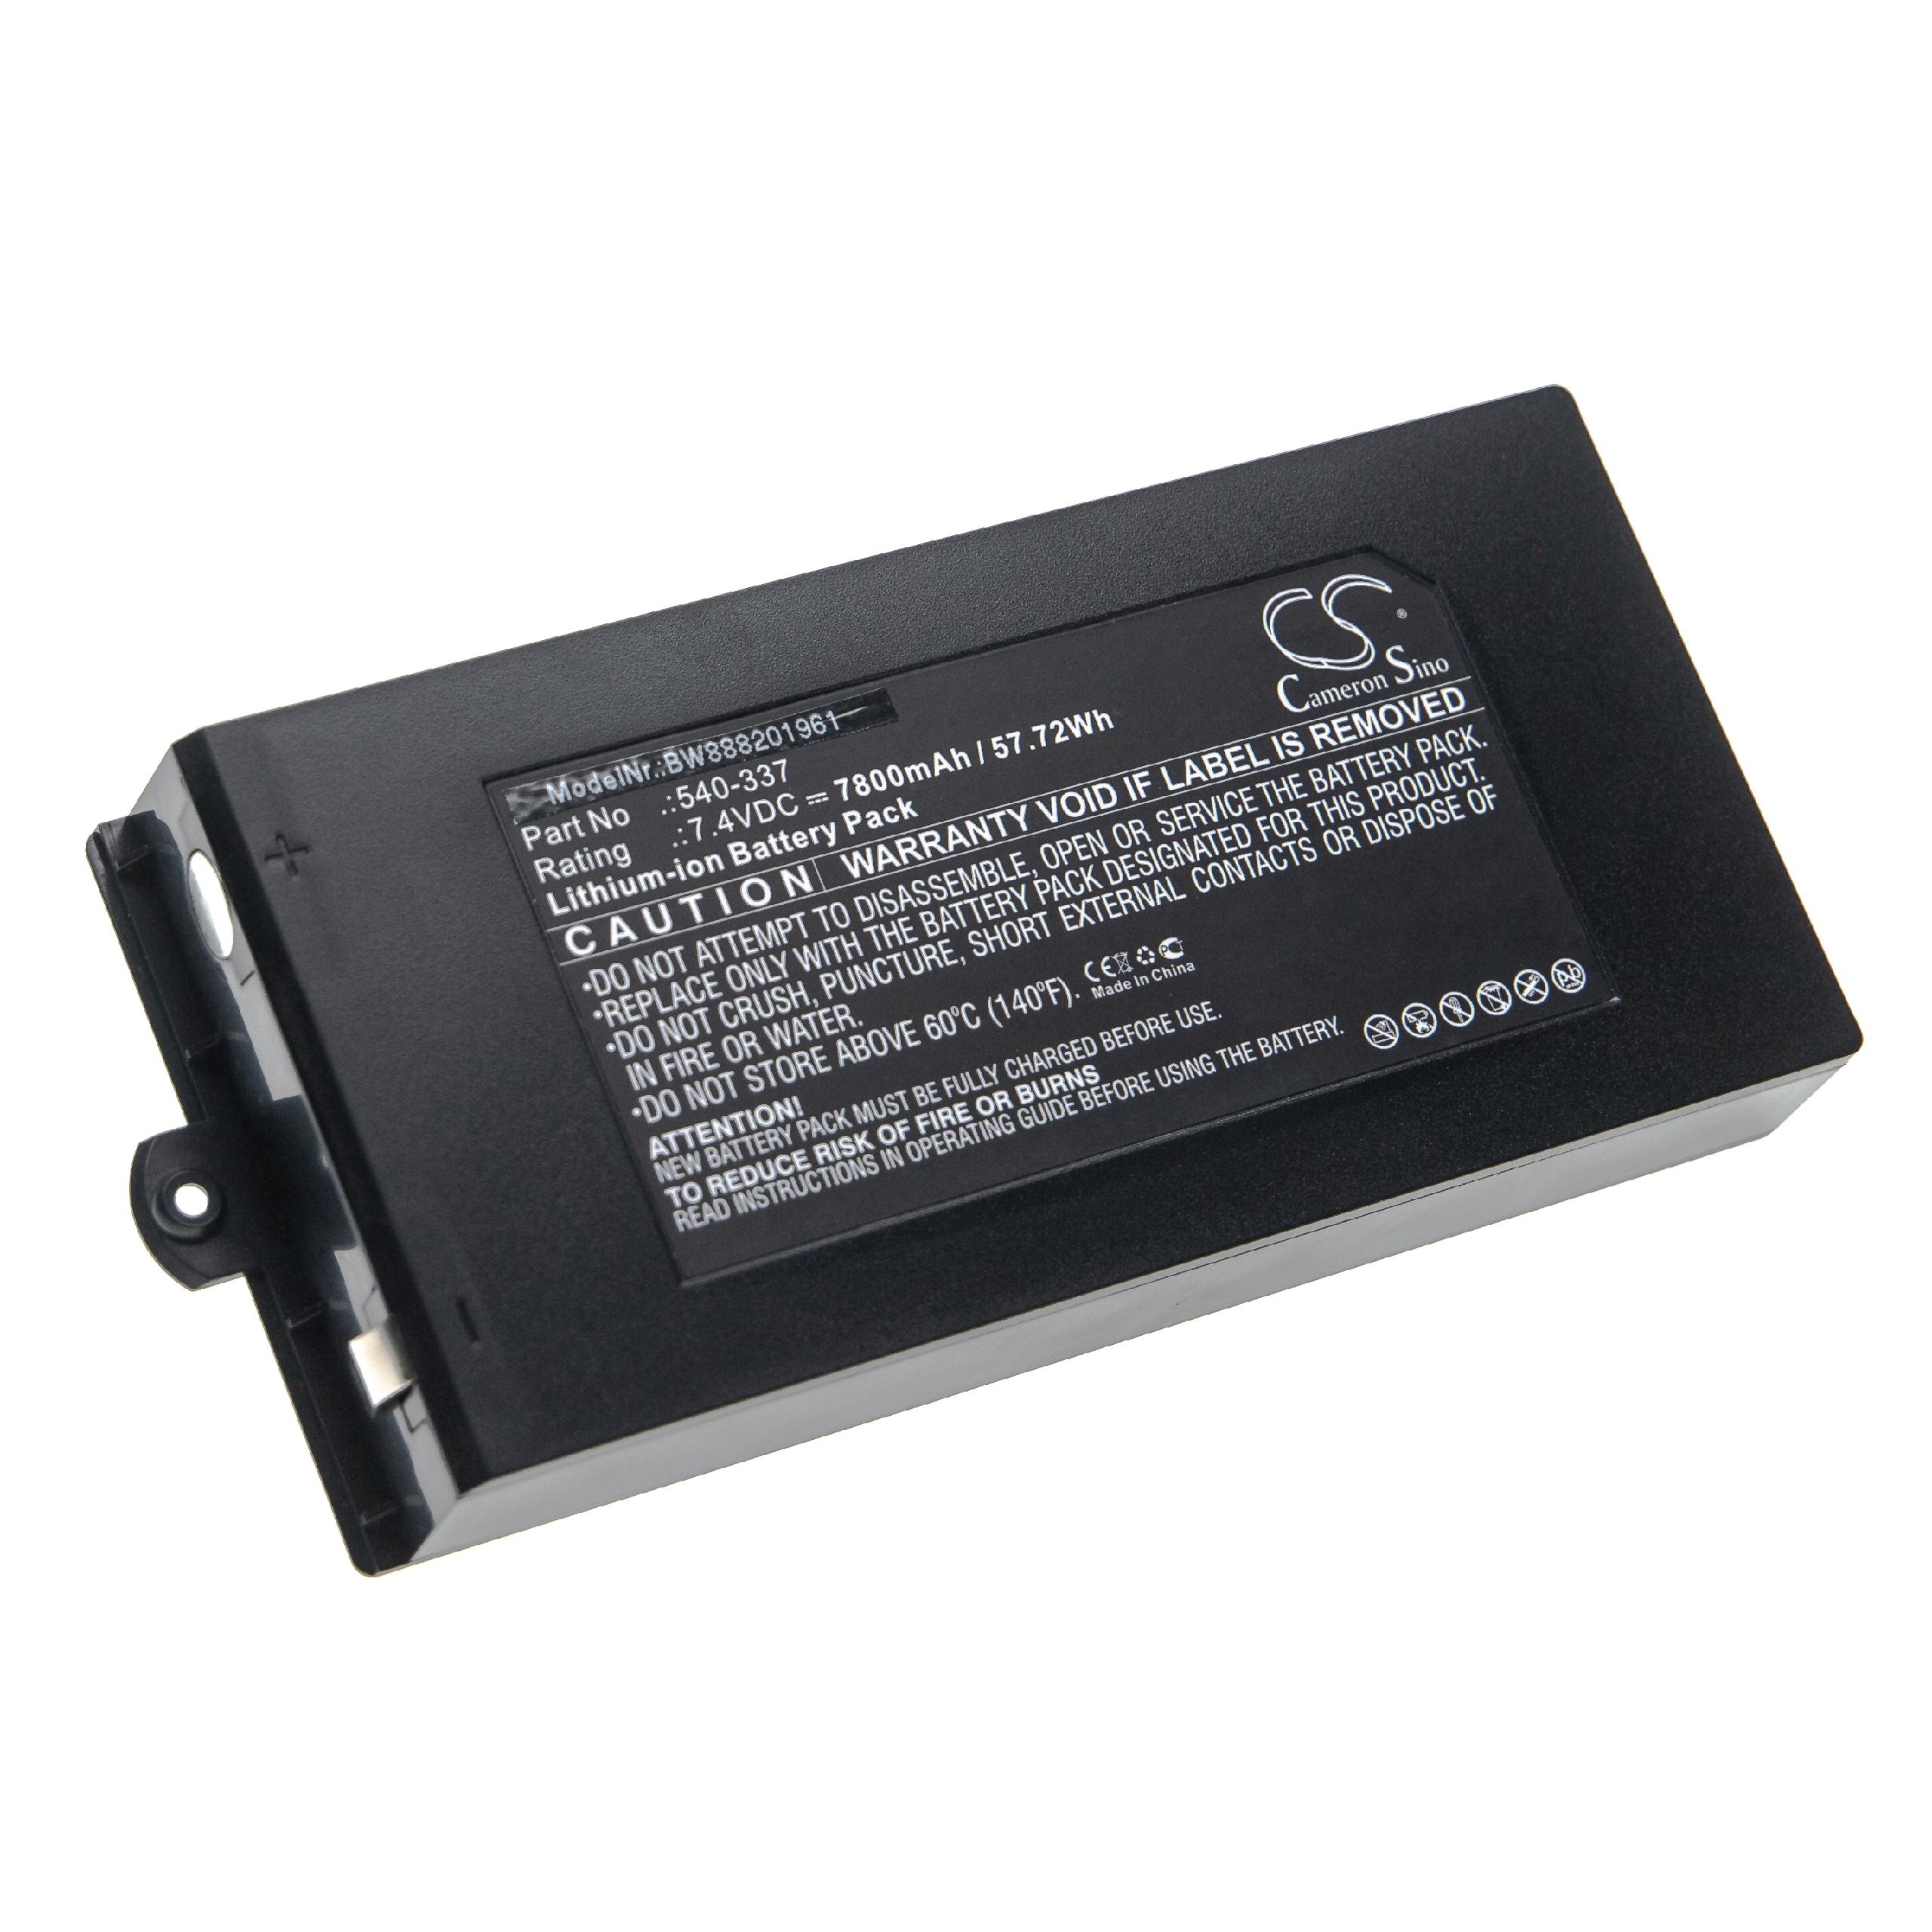 Laser Battery Replacement for Owon 540-337 - 7800mAh 7.4V Li-Ion